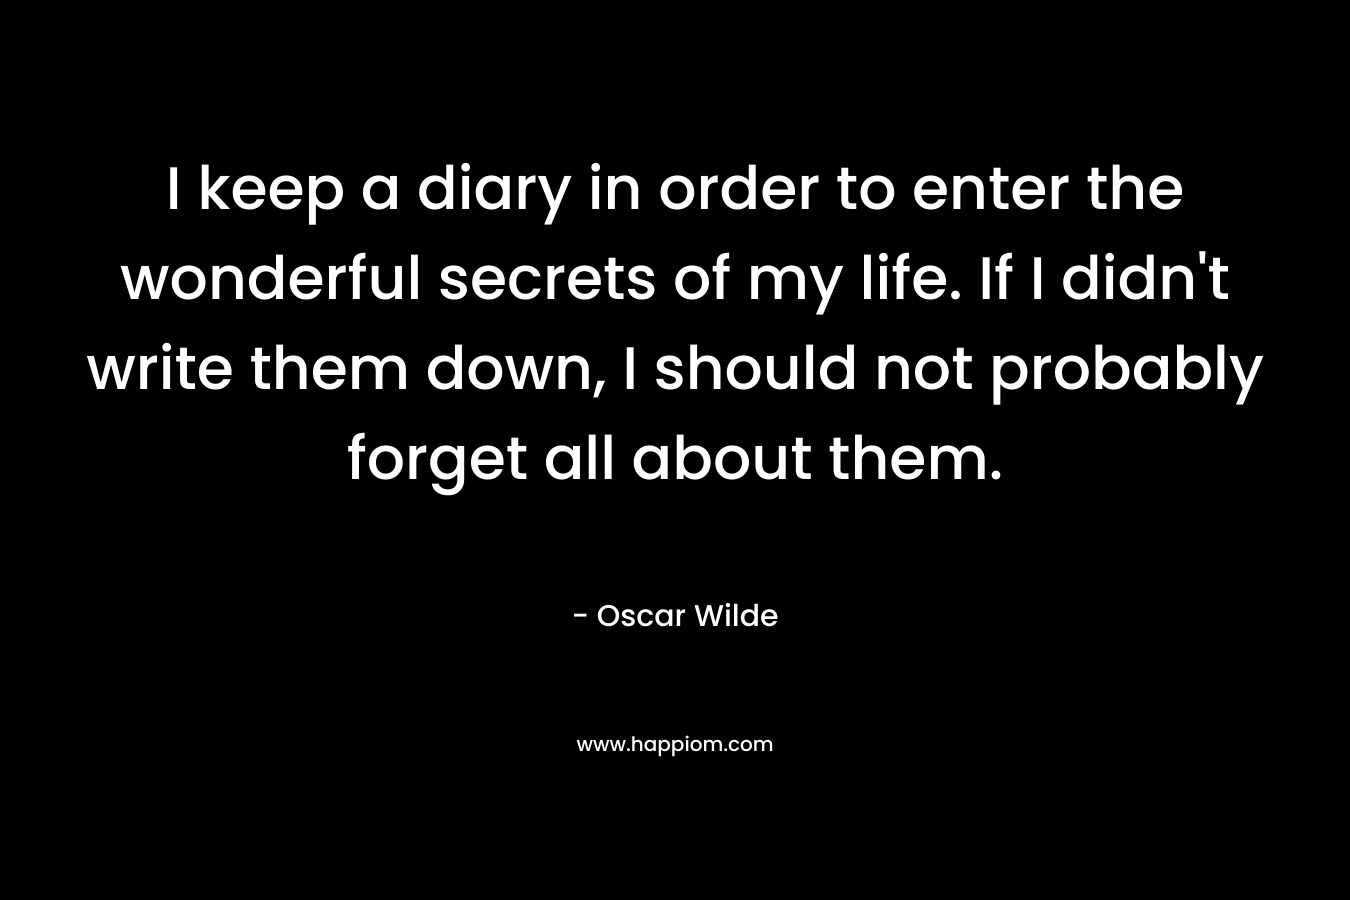 I keep a diary in order to enter the wonderful secrets of my life. If I didn’t write them down, I should not probably forget all about them. – Oscar Wilde